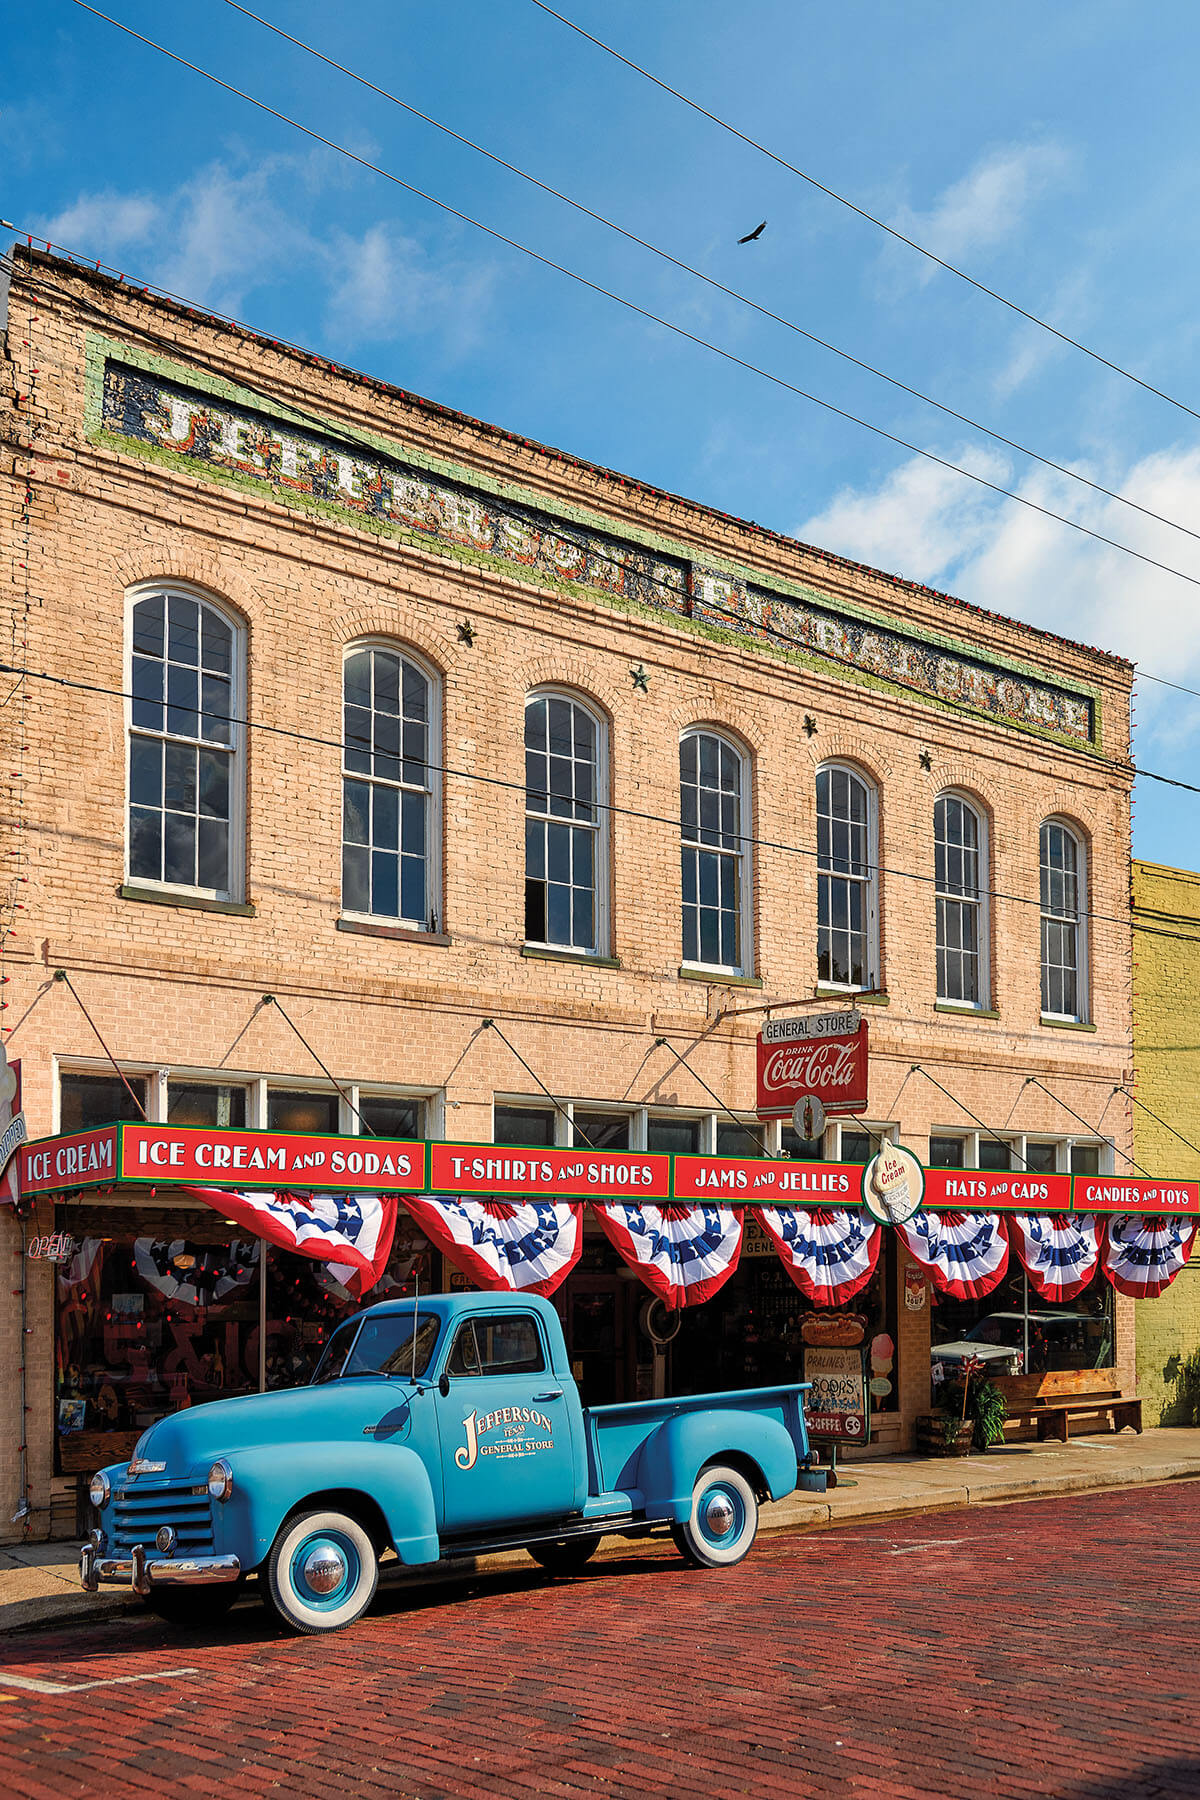 A bright blue vintage pickup truck parked out front of a brick building with red white and blue bunting hanging from the rafters